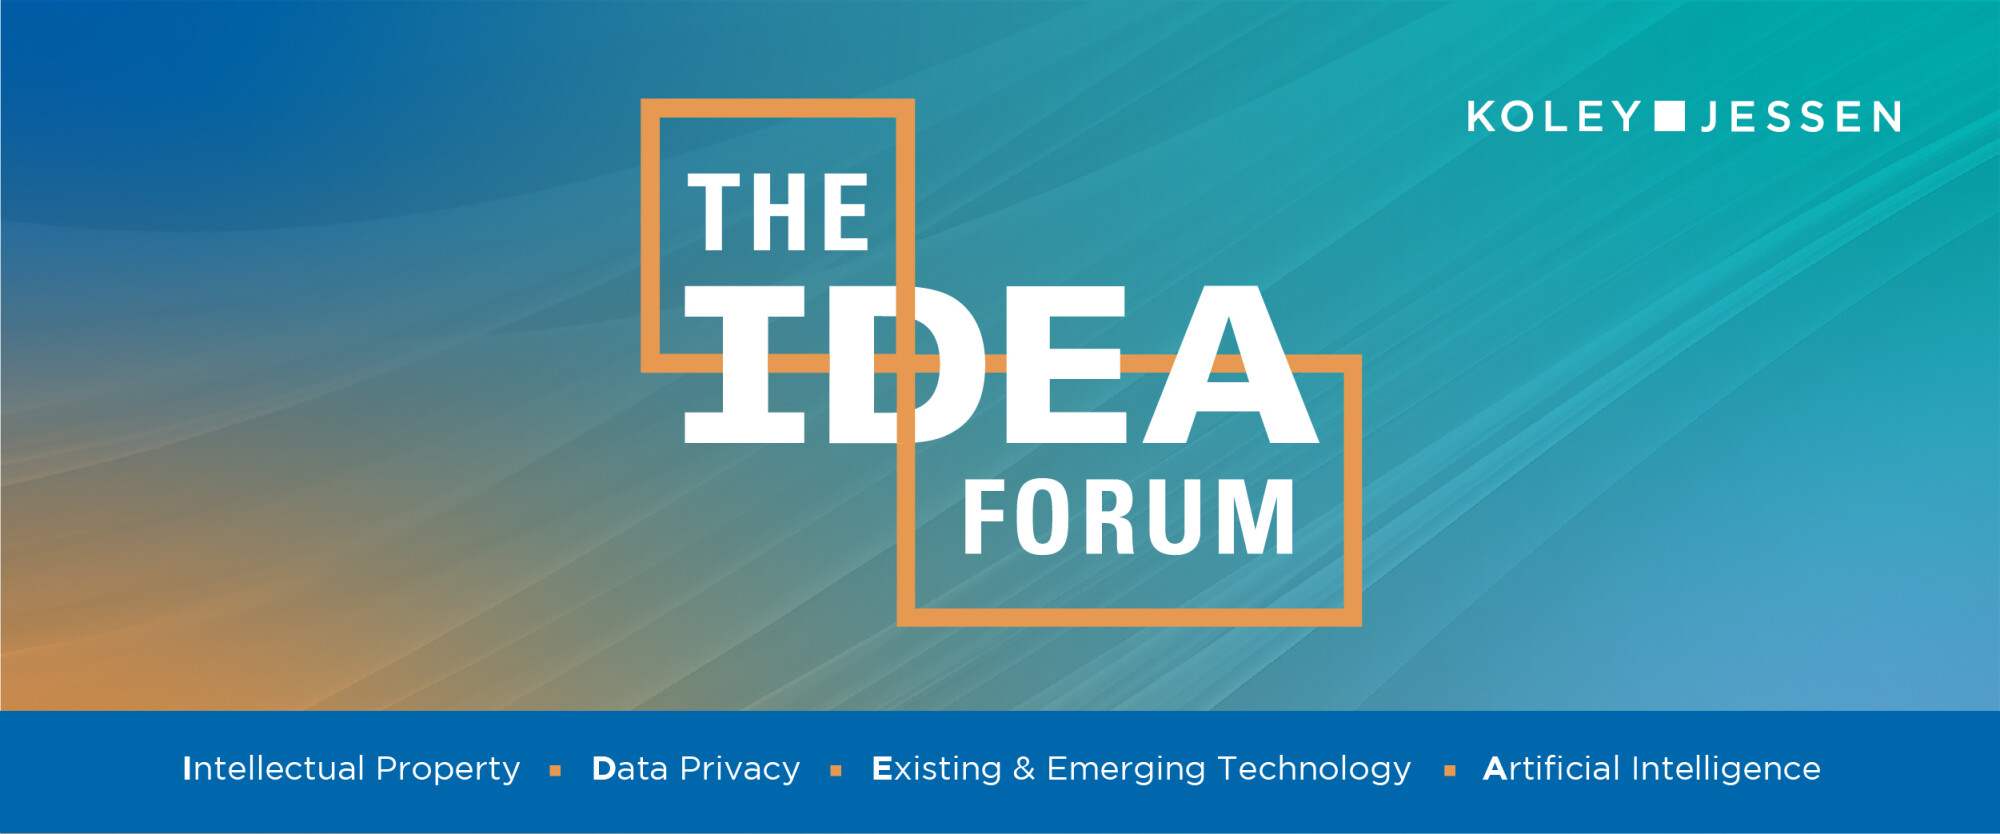 Logo for the IDEA Forum, featuring abstract curved lines. Text on the logo reads: 'the IDEA Forum' with the acronym 'IDEA' expanded as follows: Intellectual Property, Data Privacy, Existing and Emerging Technology, and Artificial Intelligence.